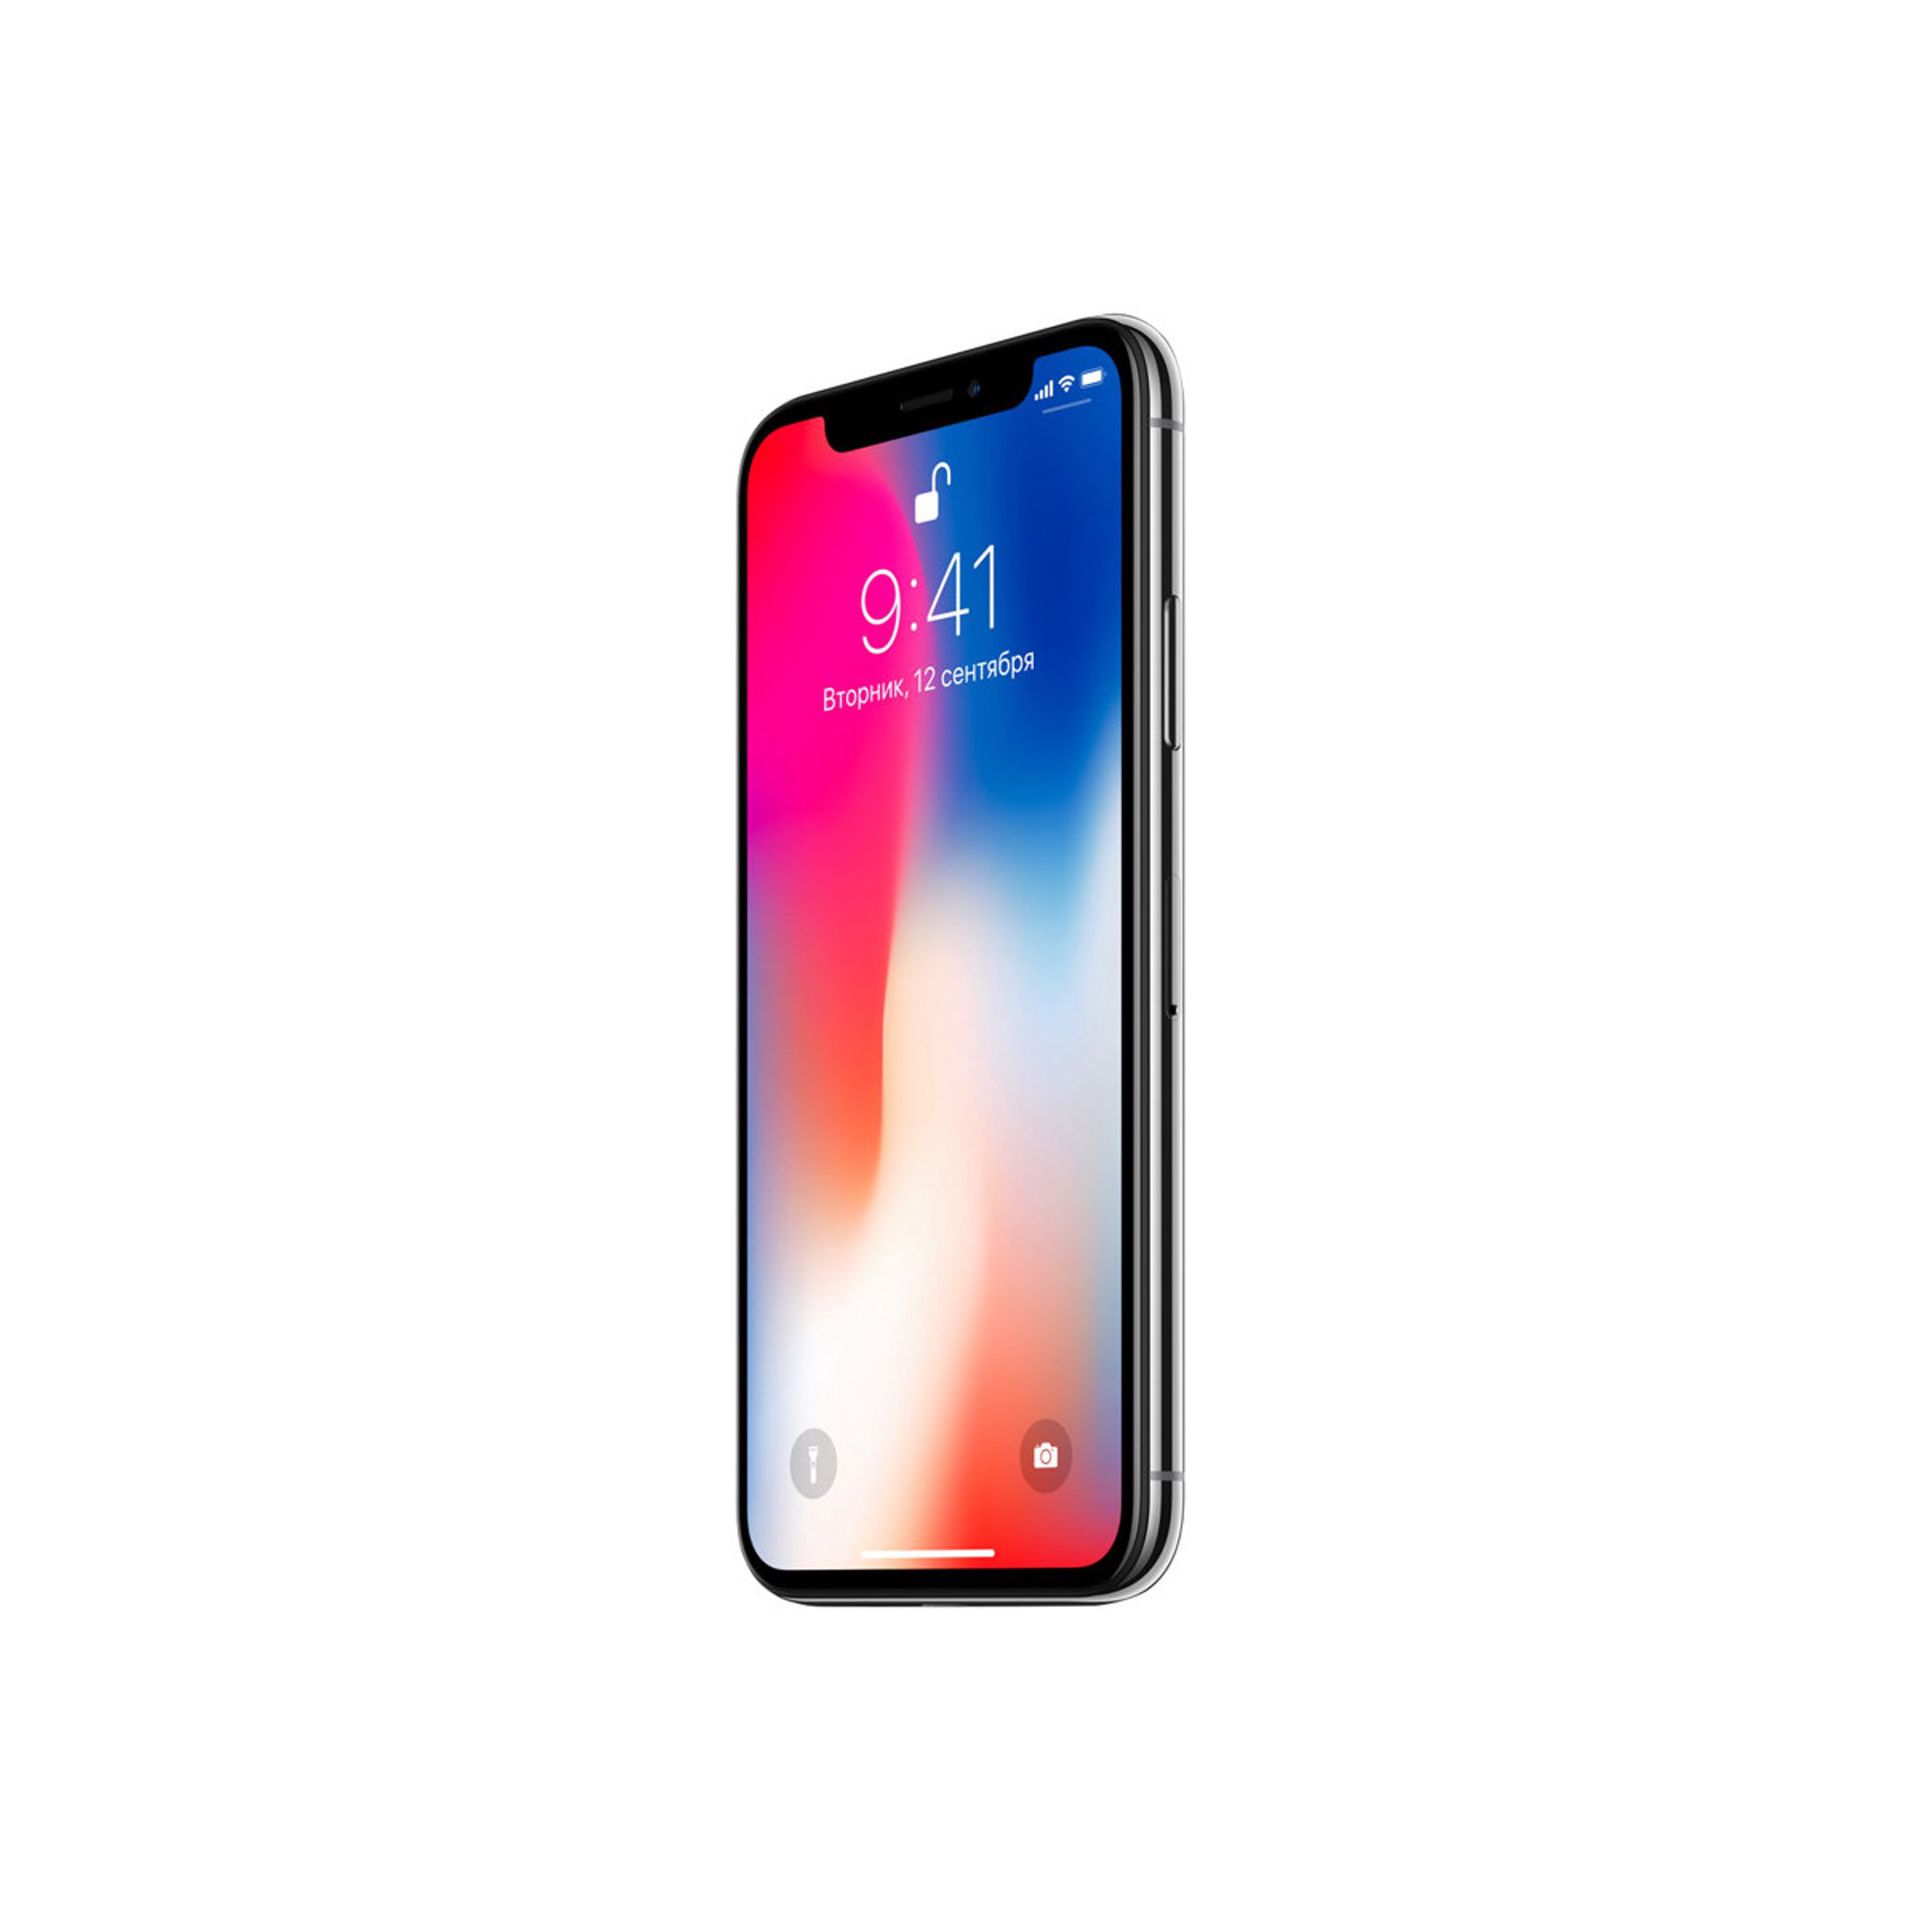 iPhone X - Fully Unlocked - 64gb - Excellent Condition